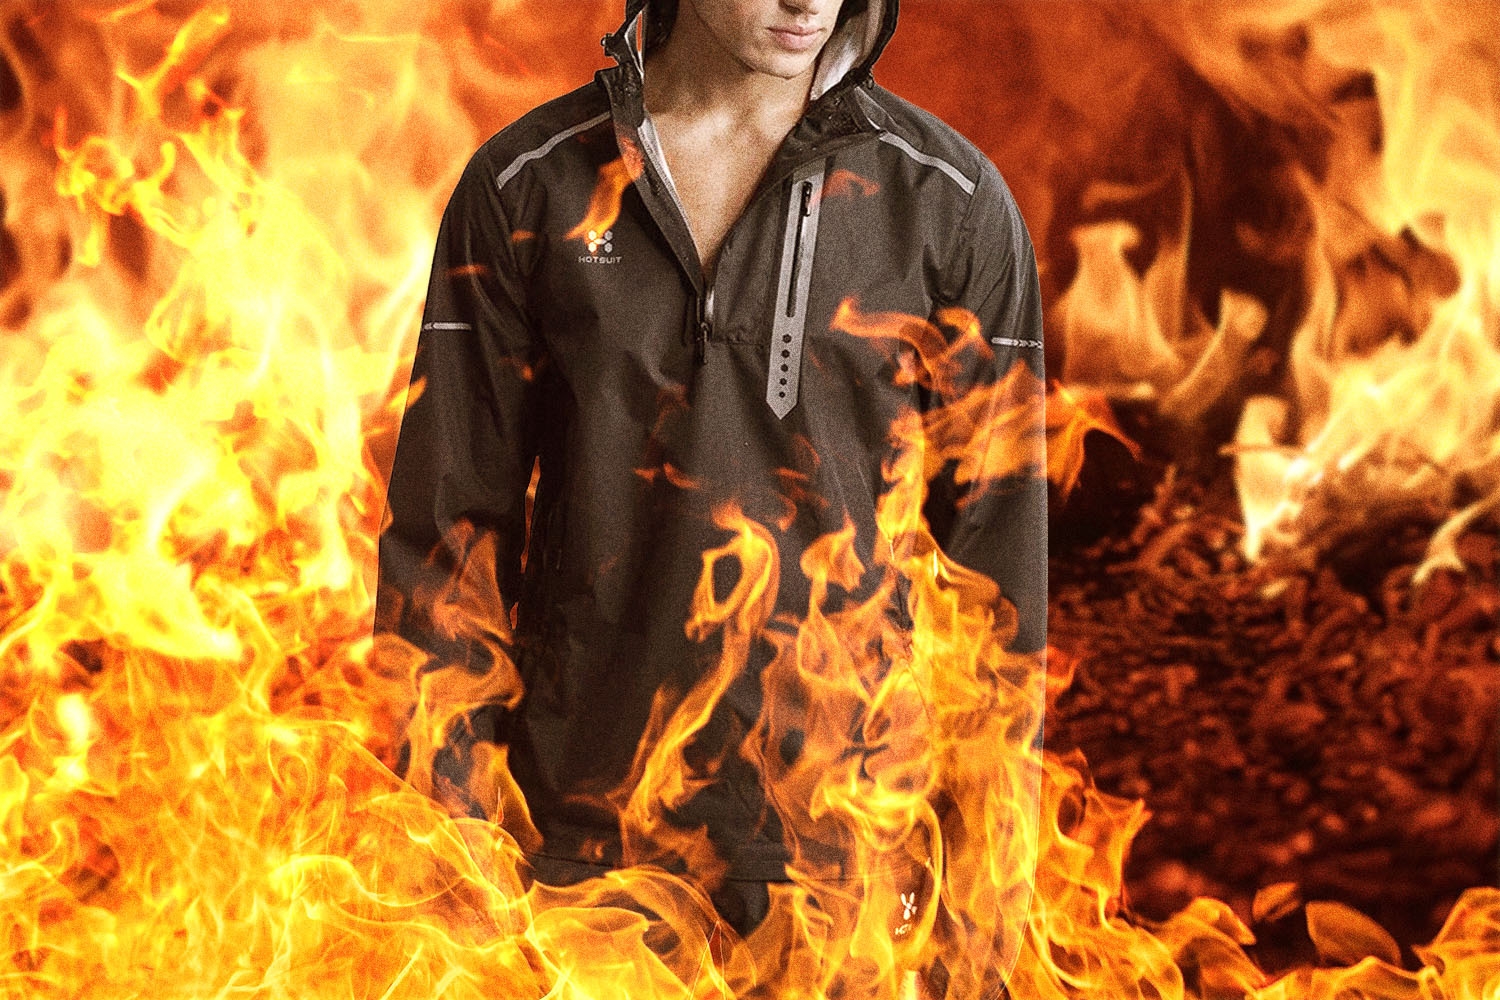 A man wearing a HOTSUIT and covered in flames.